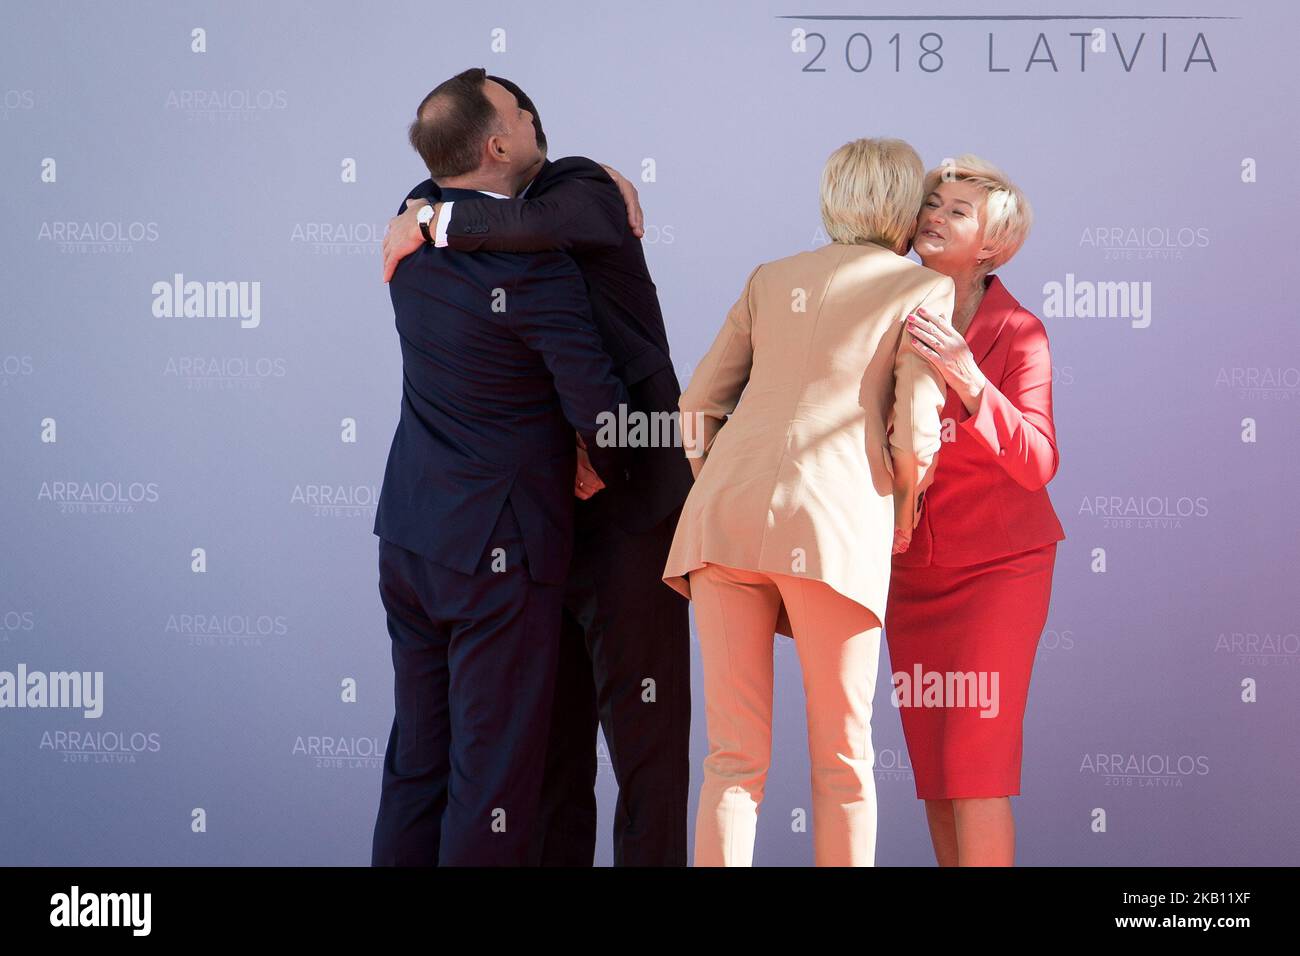 President of Poland Andrzej Duda and his wife Agata Kornhauser-Duda, President of Latvia Raimonds Vejonis and his wife Iveta Vejone, during the 14th informal meeting of the Arraiolos Group at Rundale Palace in Rundale, Latvia on 13 September 2018. The Arraiolos Group meeting brings together heads of states from 13 countries - Austria, Bulgaria, Croatia, Estonia, Finland, Germany, Greece, Hungary, Italy, Latvia, Malta, Poland, Portugal, and Slovenia. (Photo by Mateusz Wlodarczyk/NurPhoto) Stock Photo